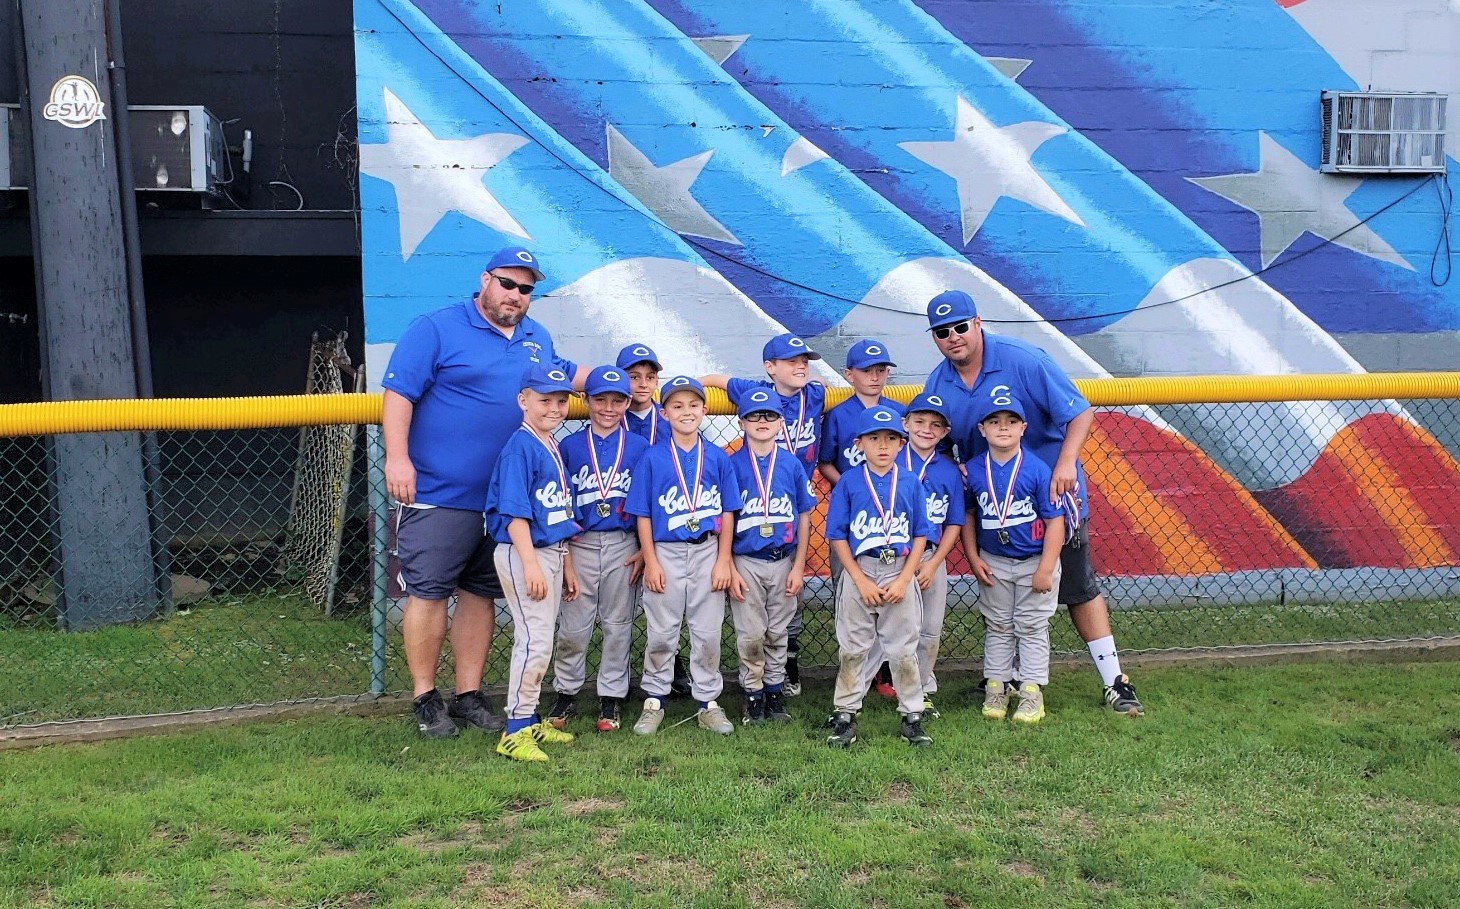 2018 James McElroy Tournament runner ups Pee Wee division.